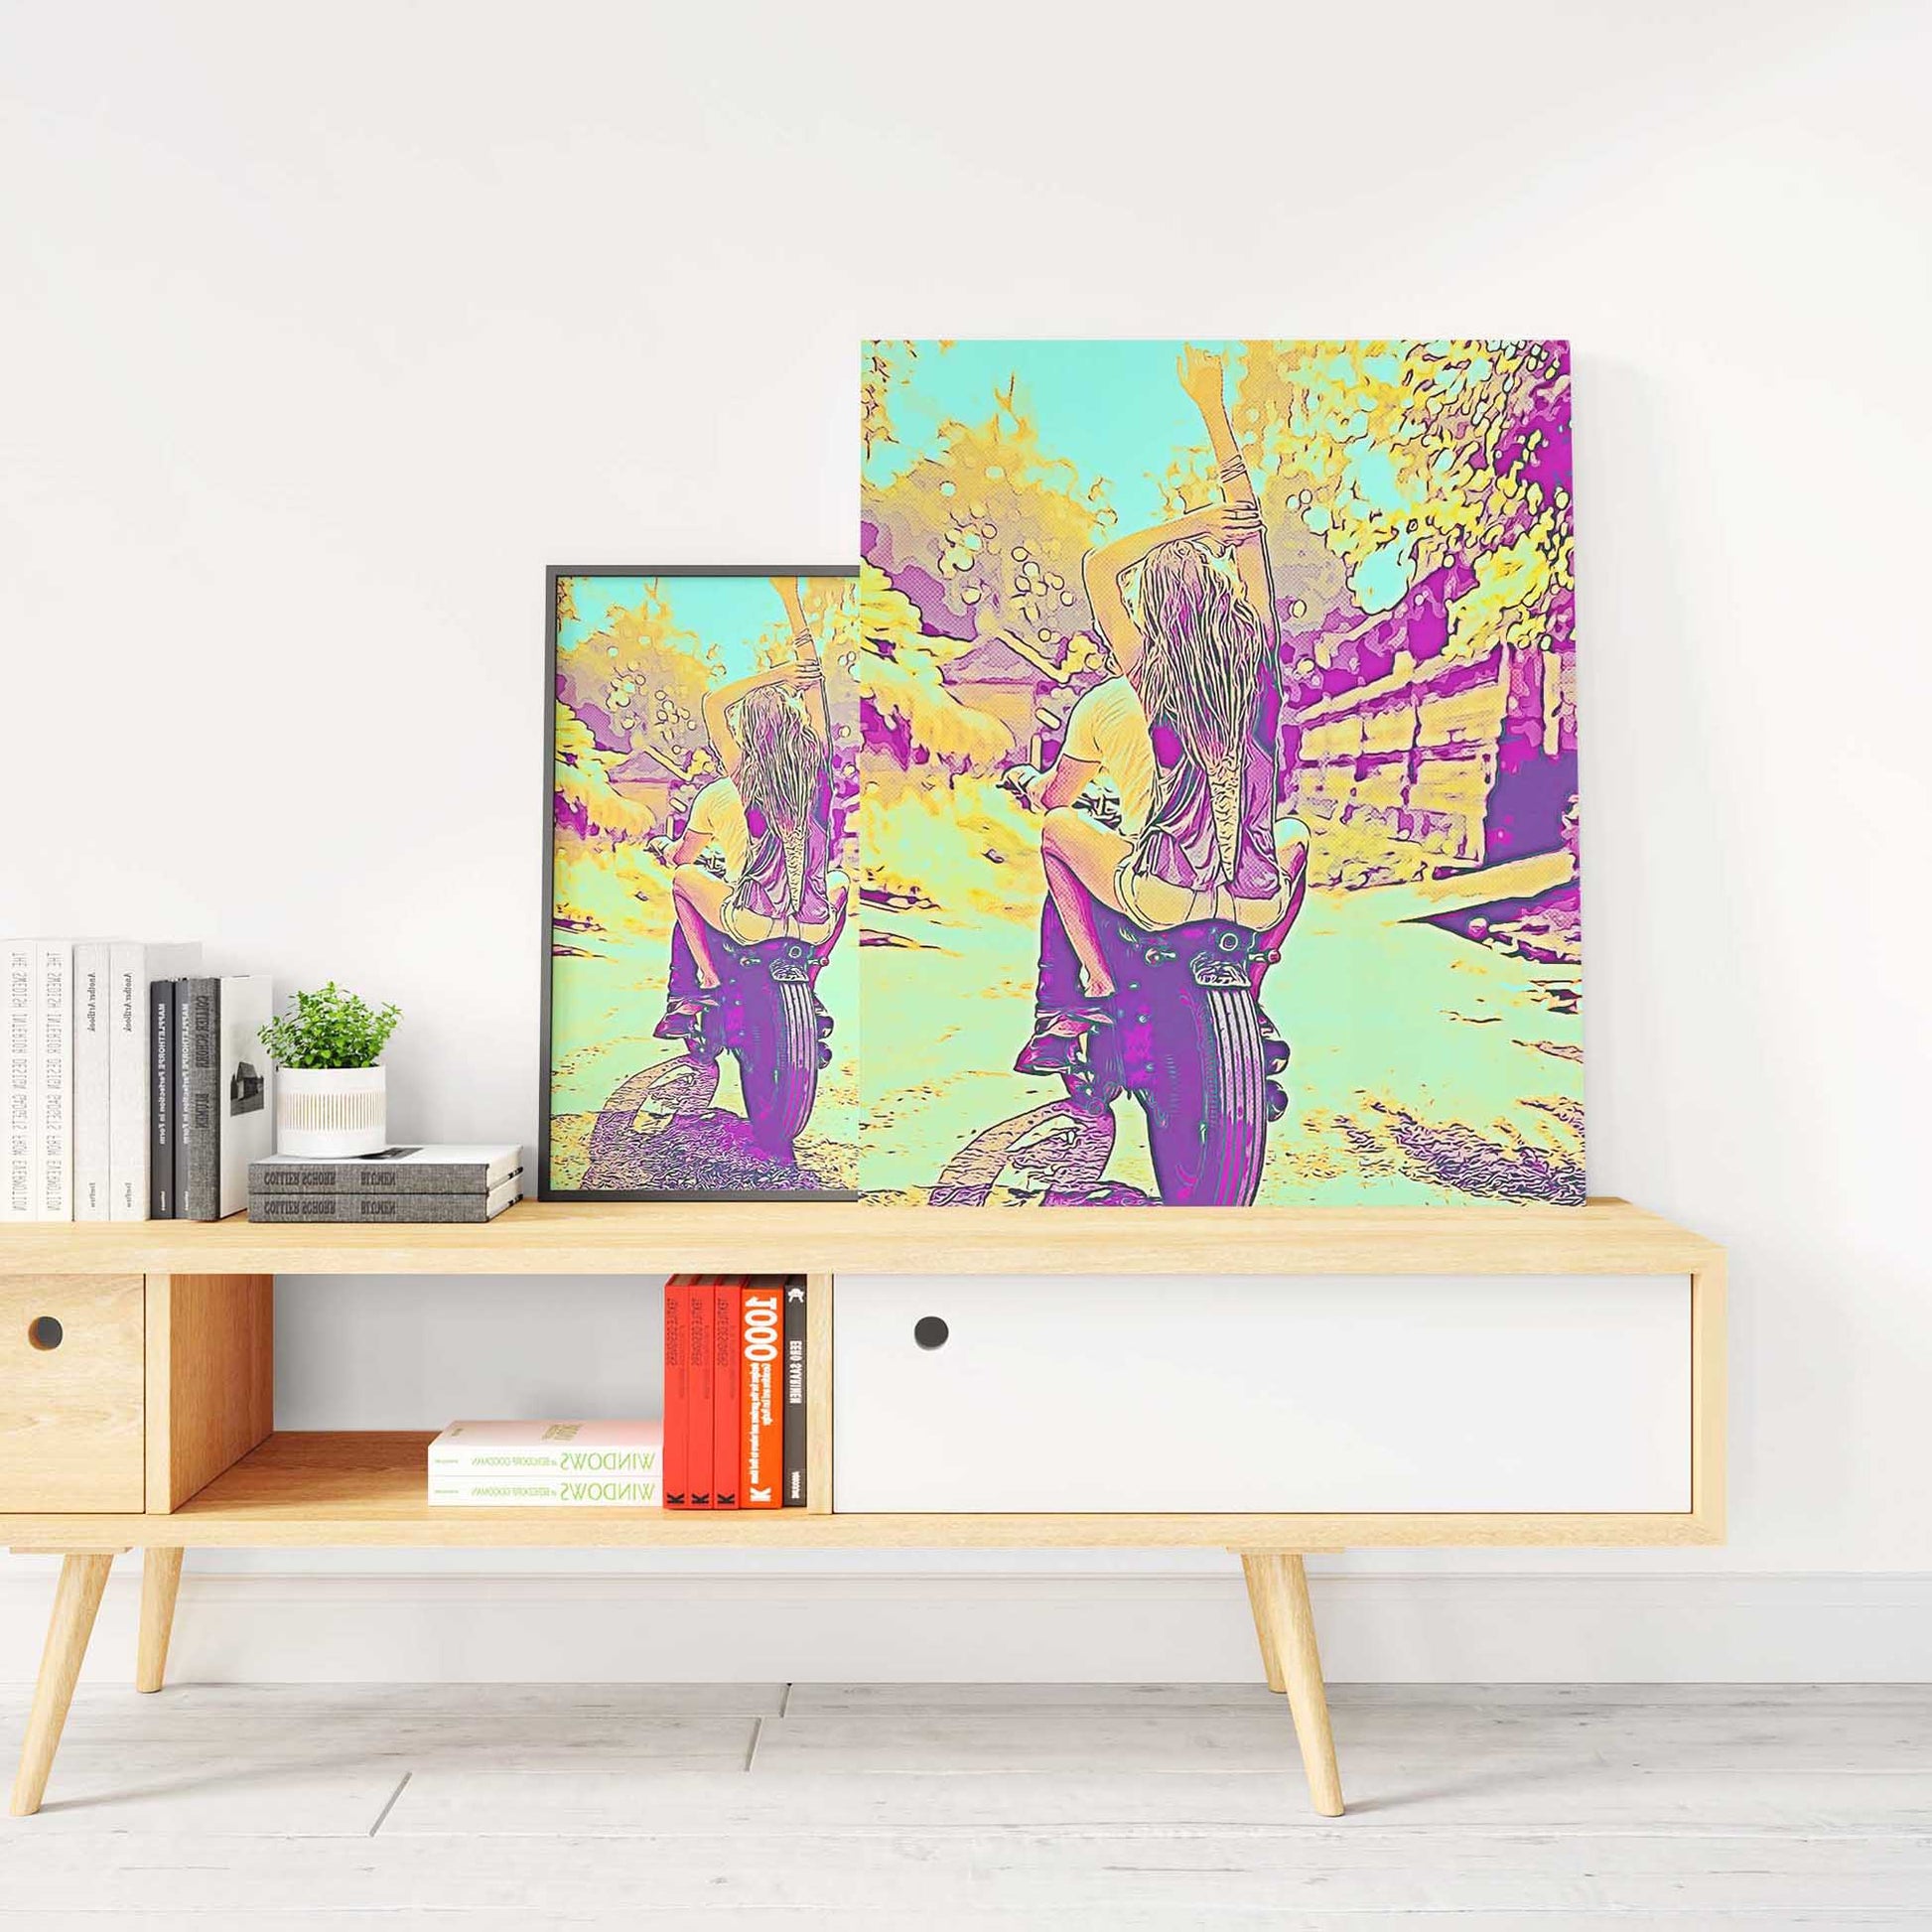 Add a dash of creativity and laughter to your home with our Personalised Blue and Yellow Cartoon Canvas. These unique artworks, created from your photos, bring a fresh and funky vibe to any space